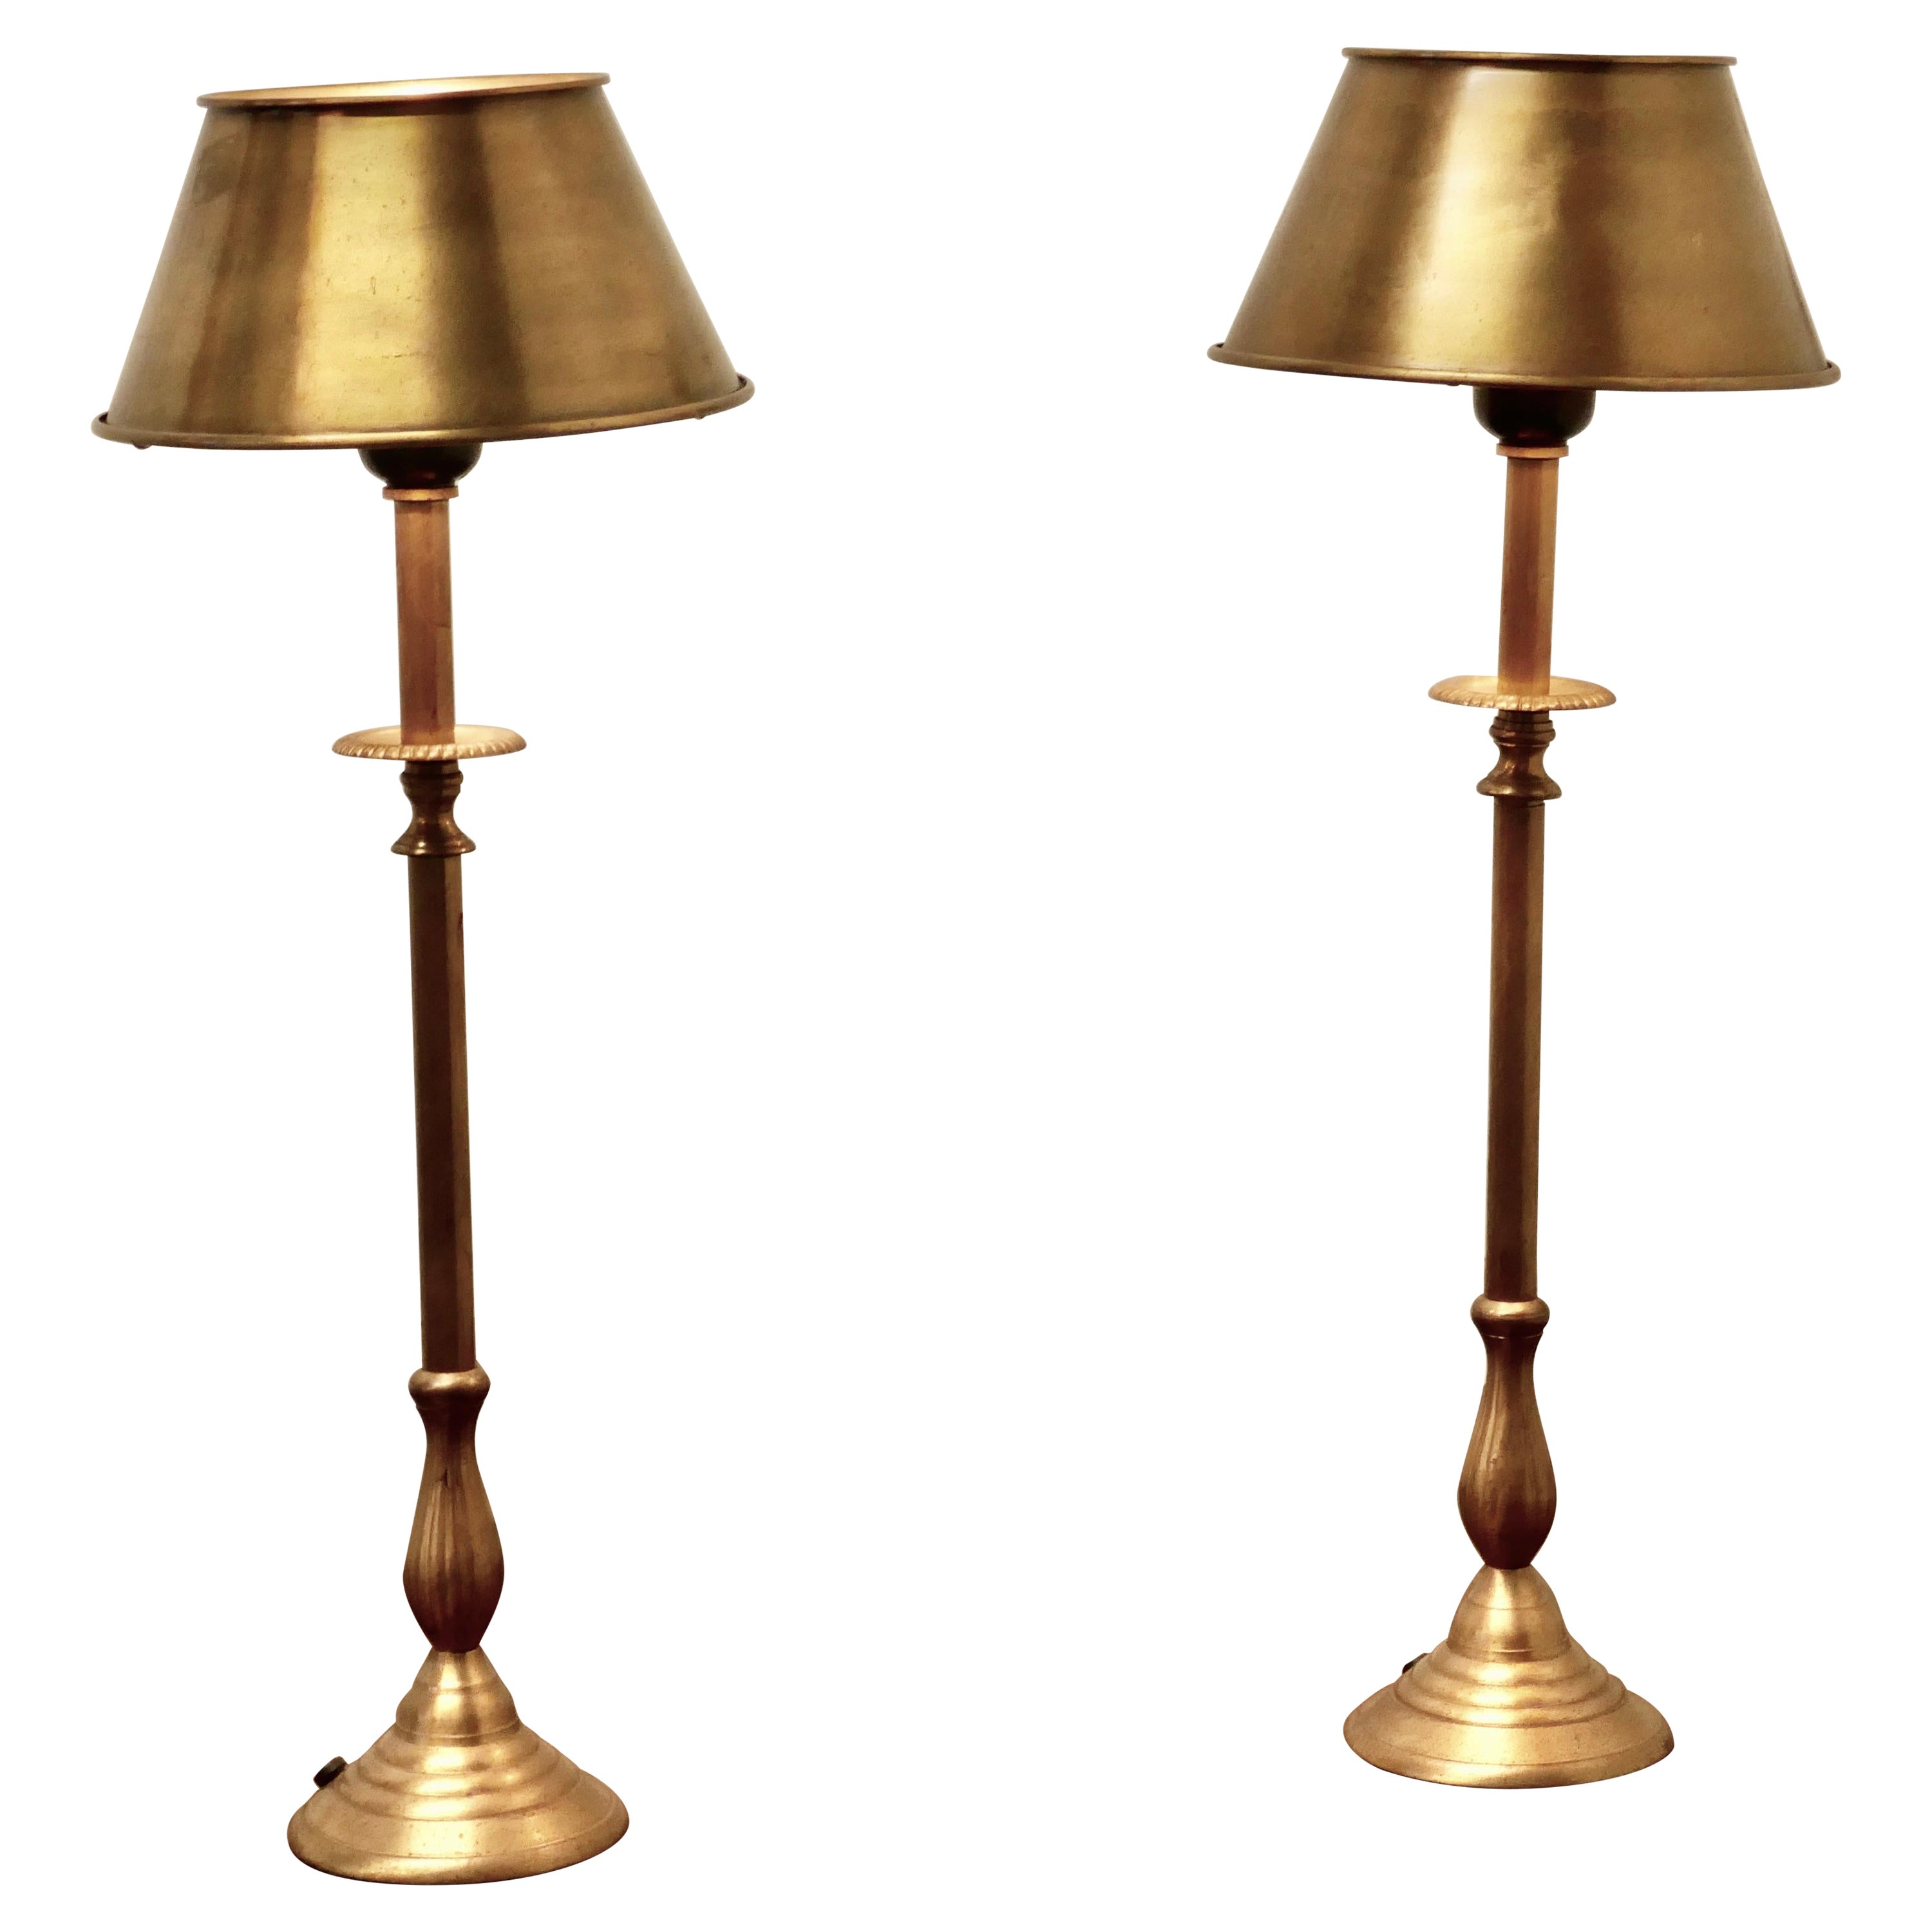 Pair of Tall French Brass Column Table Lamps with Brass Shades